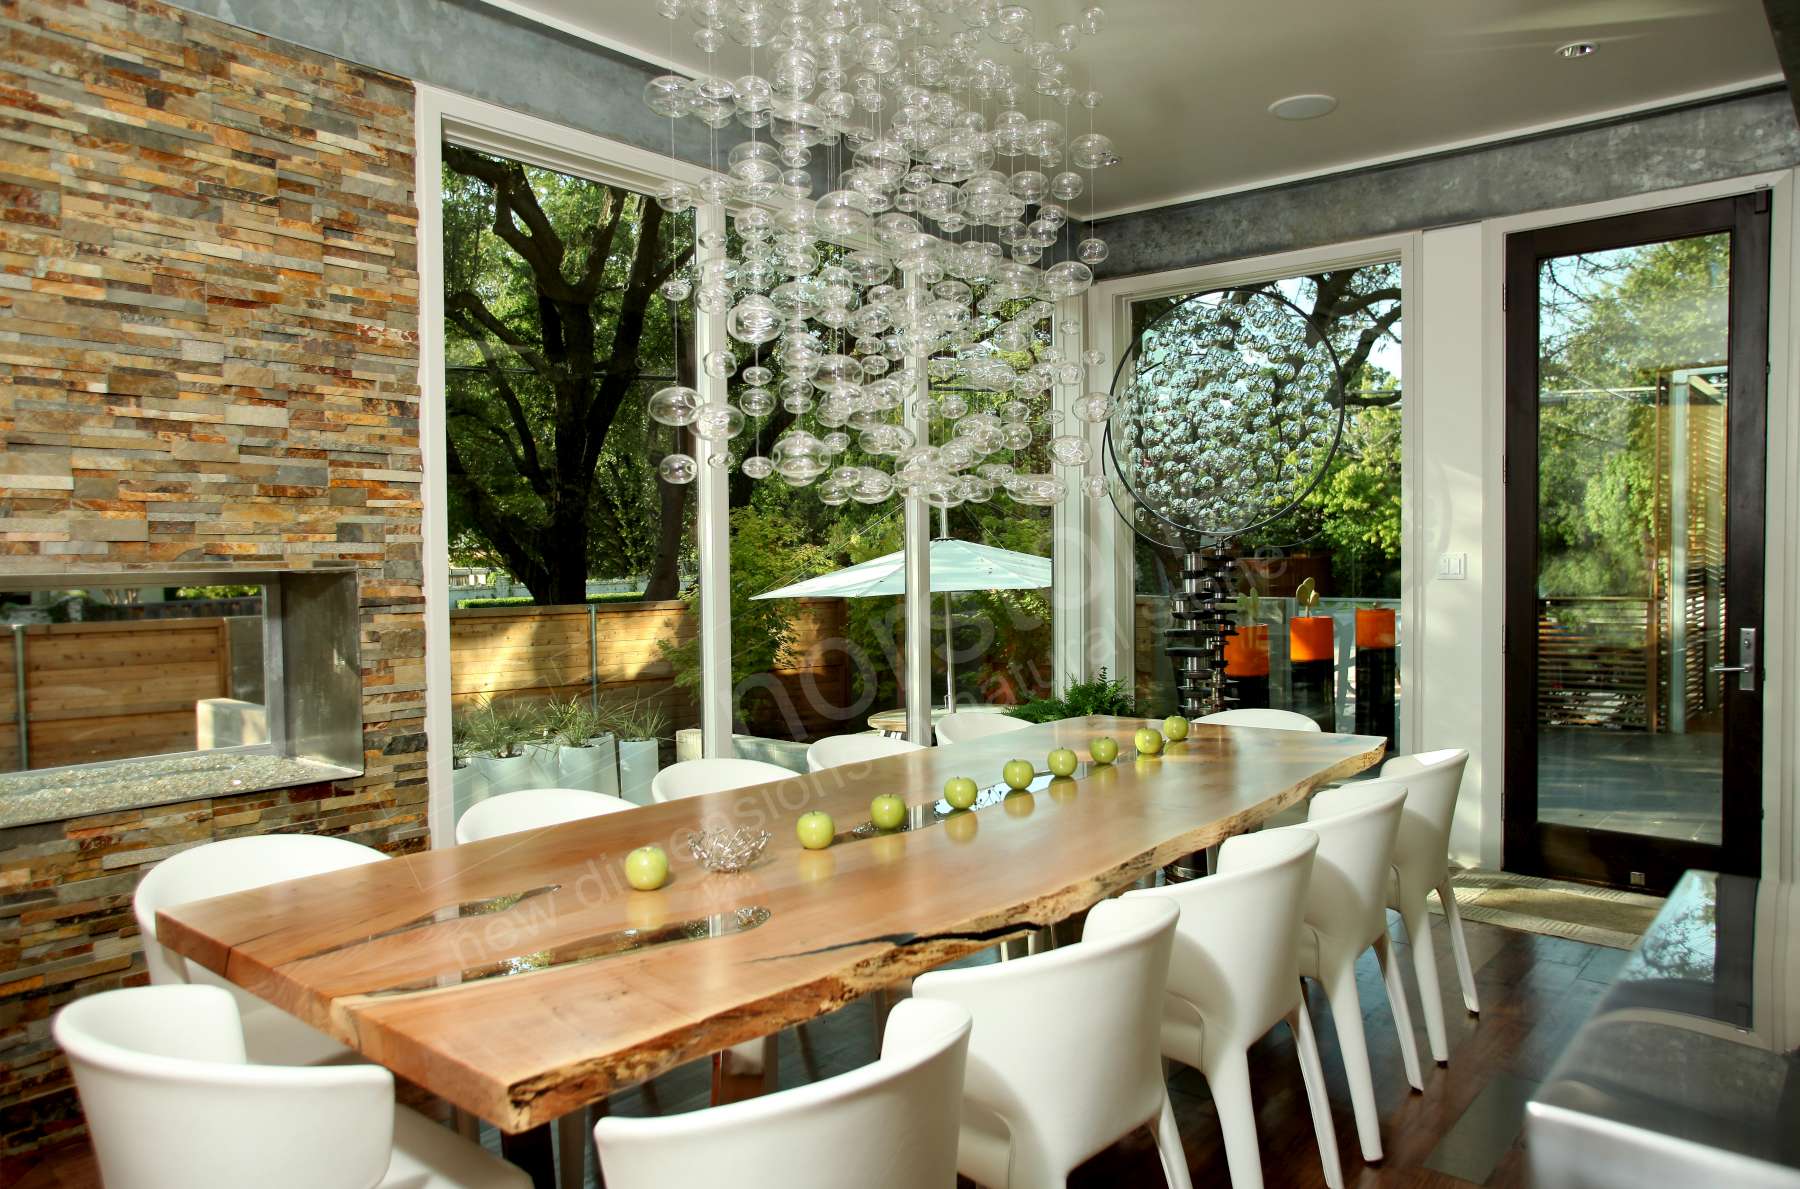 How furniture can be paired with natural stone veneer walls to enhance the design of a space